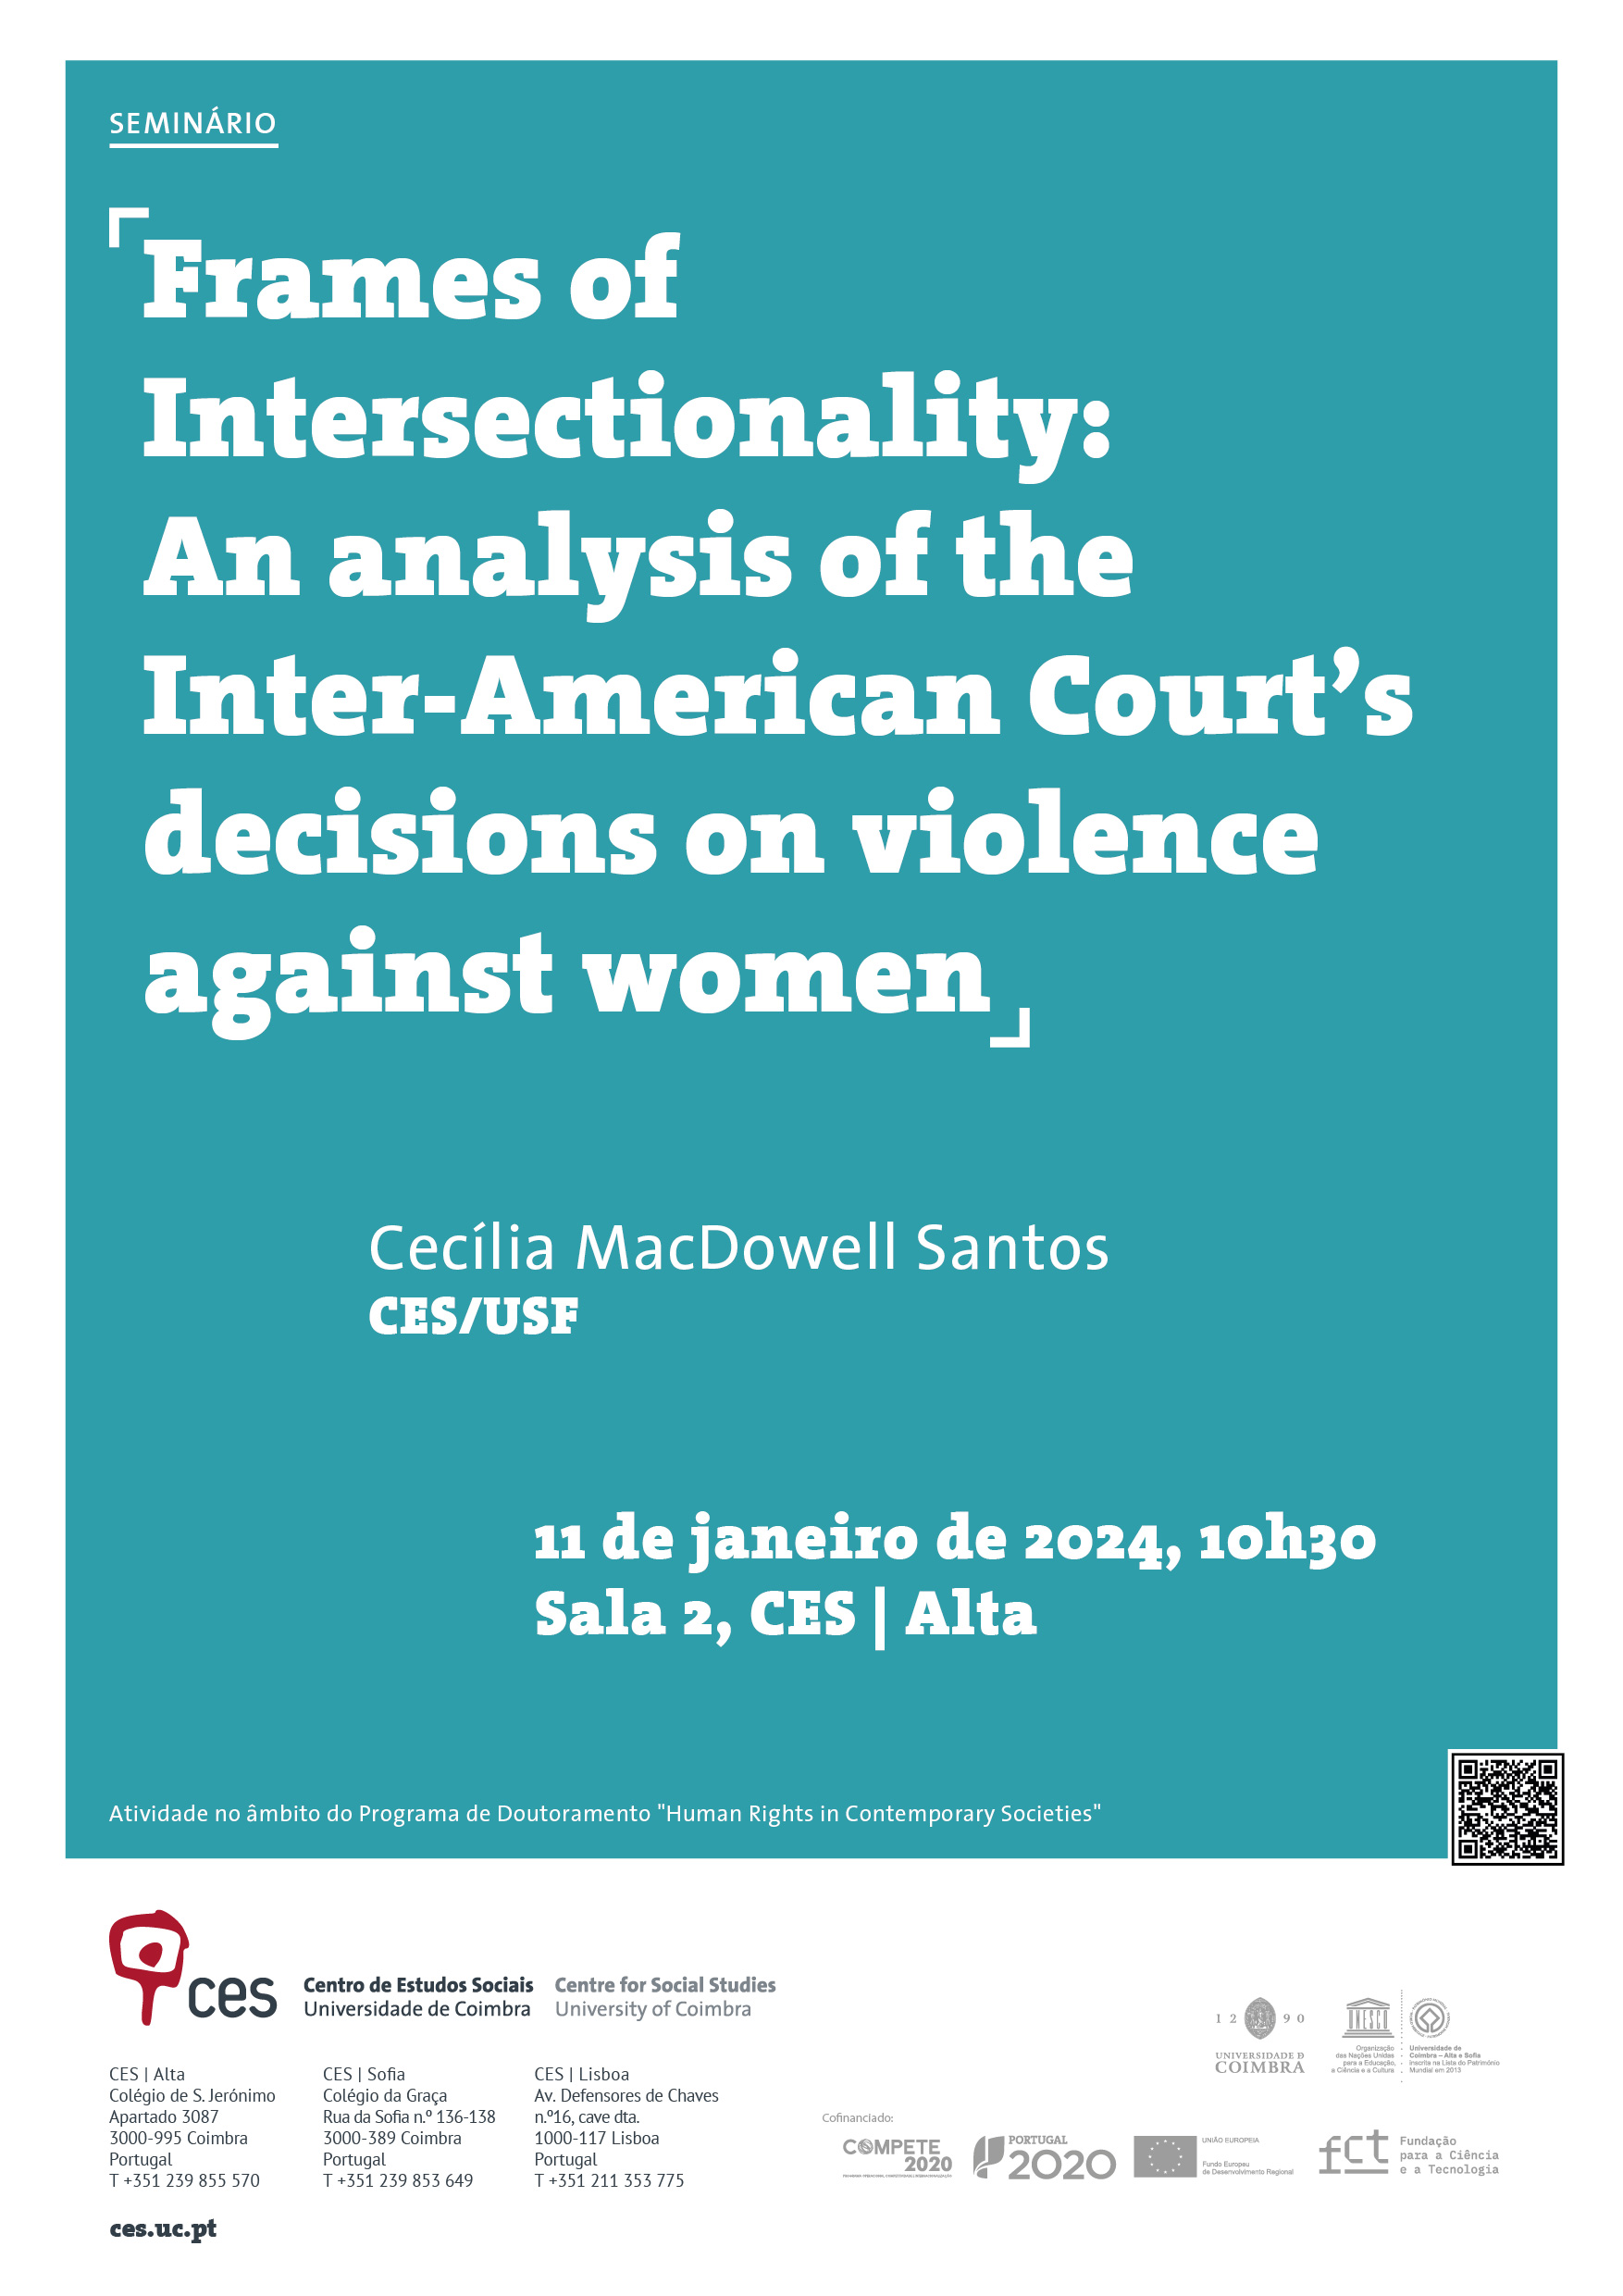 Frames of Intersectionality: An analysis of the Inter-American Court’s decisions on violence against women<span id="edit_44794"><script>$(function() { $('#edit_44794').load( "/myces/user/editobj.php?tipo=evento&id=44794" ); });</script></span>